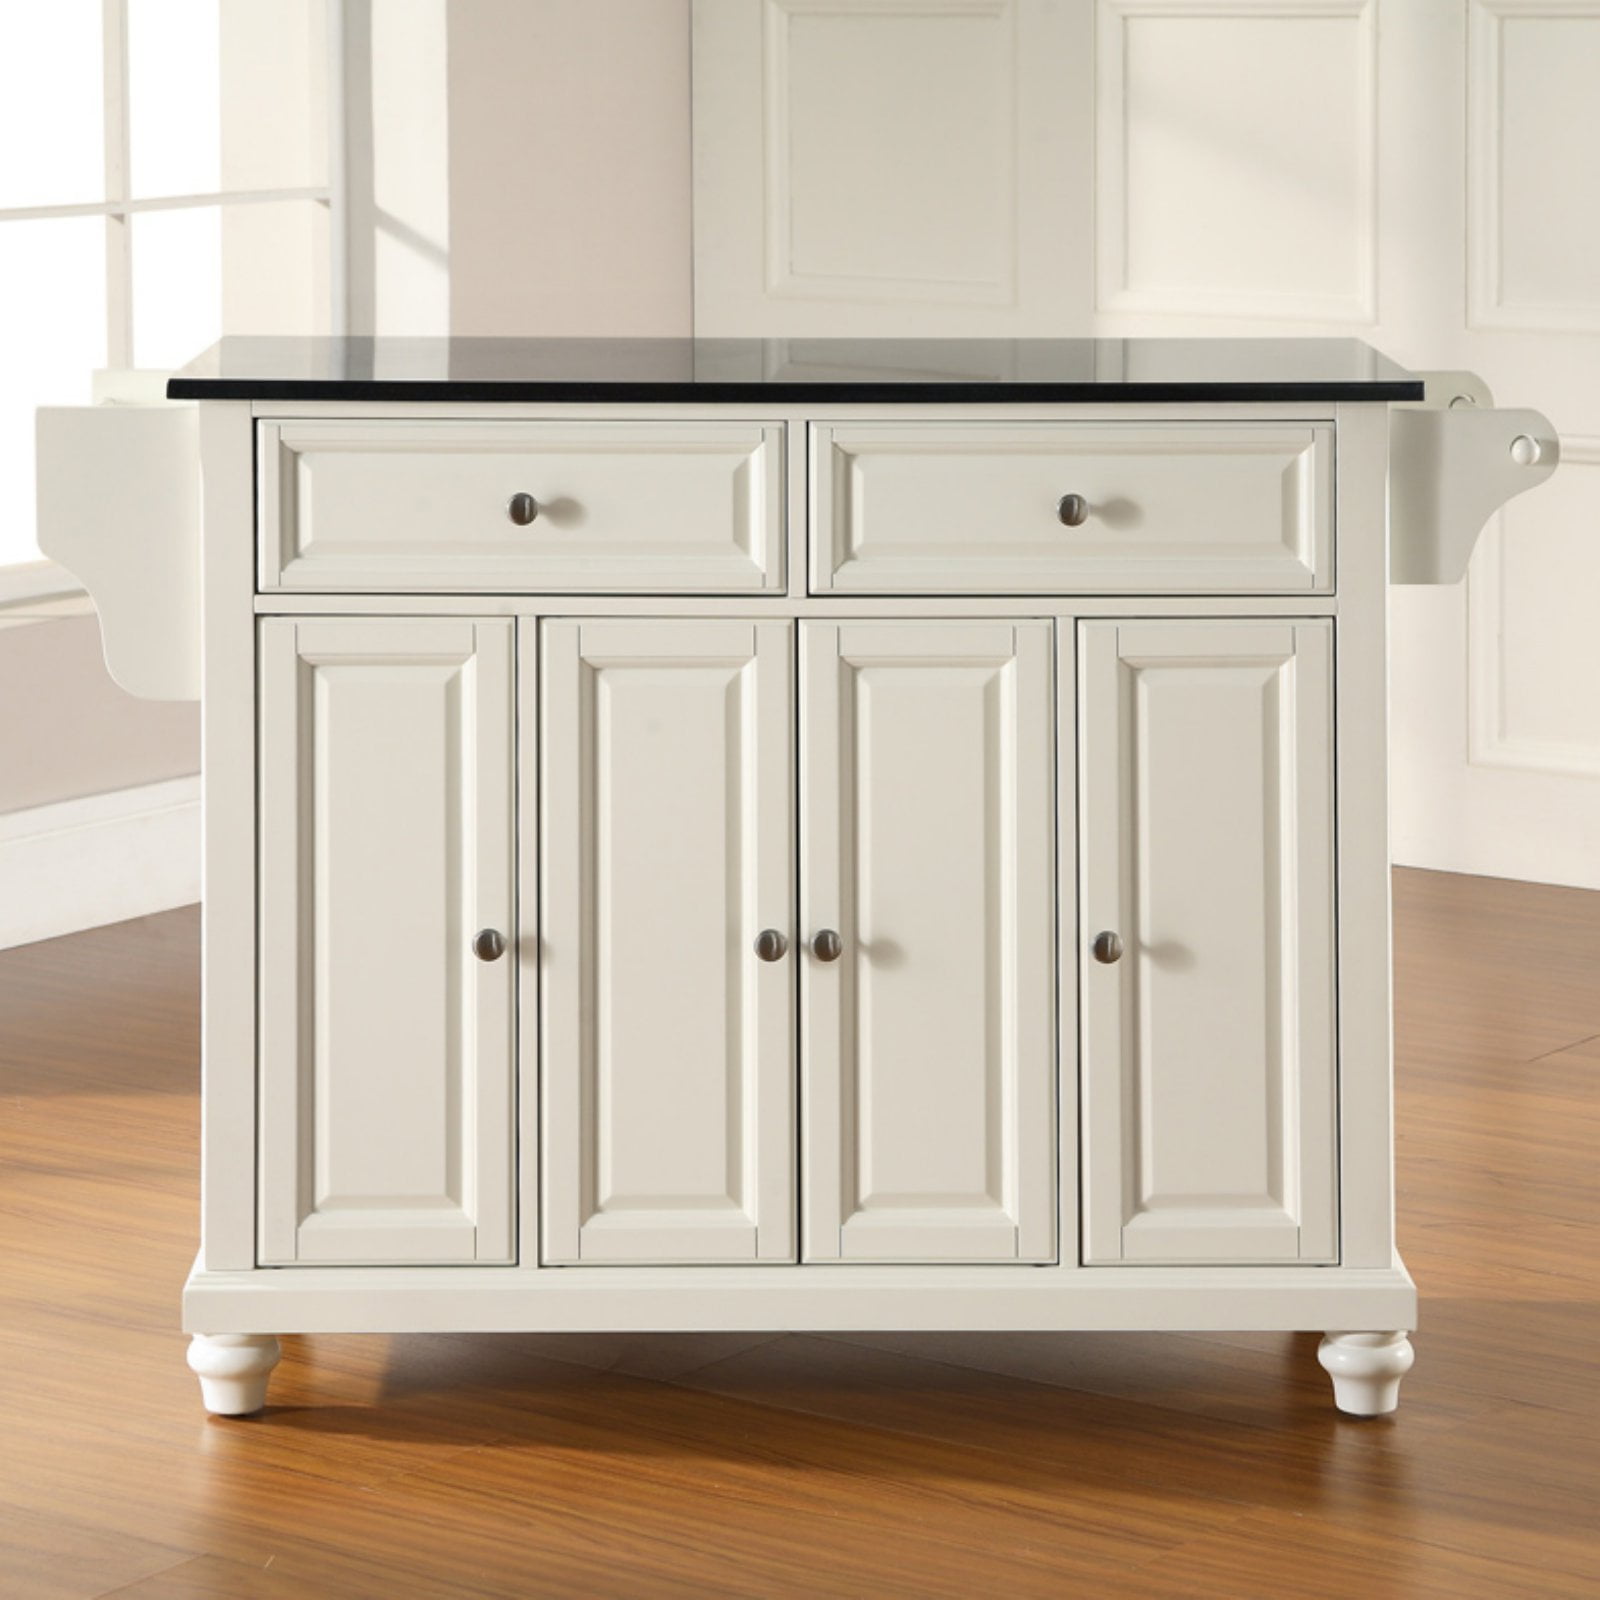 New Crosley Furniture Kitchen Island for Large Space